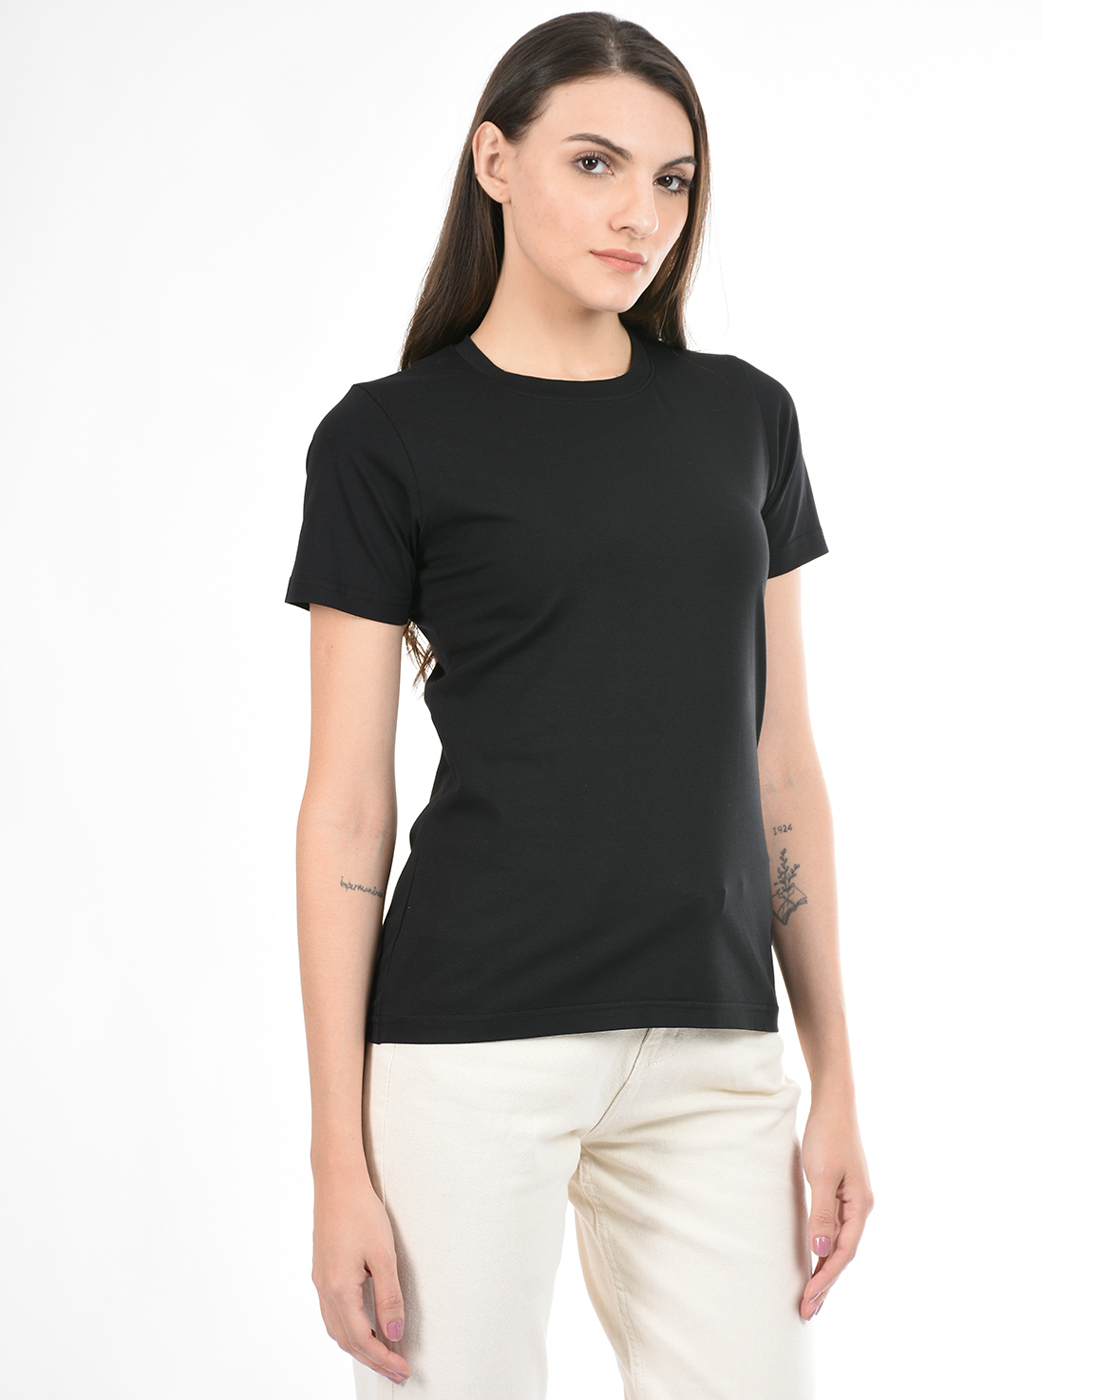 ONEWAY Round Neck Half Sleeves Solid T-Shirt for Women|Cotton Blend|Regular Fit|Stretchable|Women Casual Westernwear